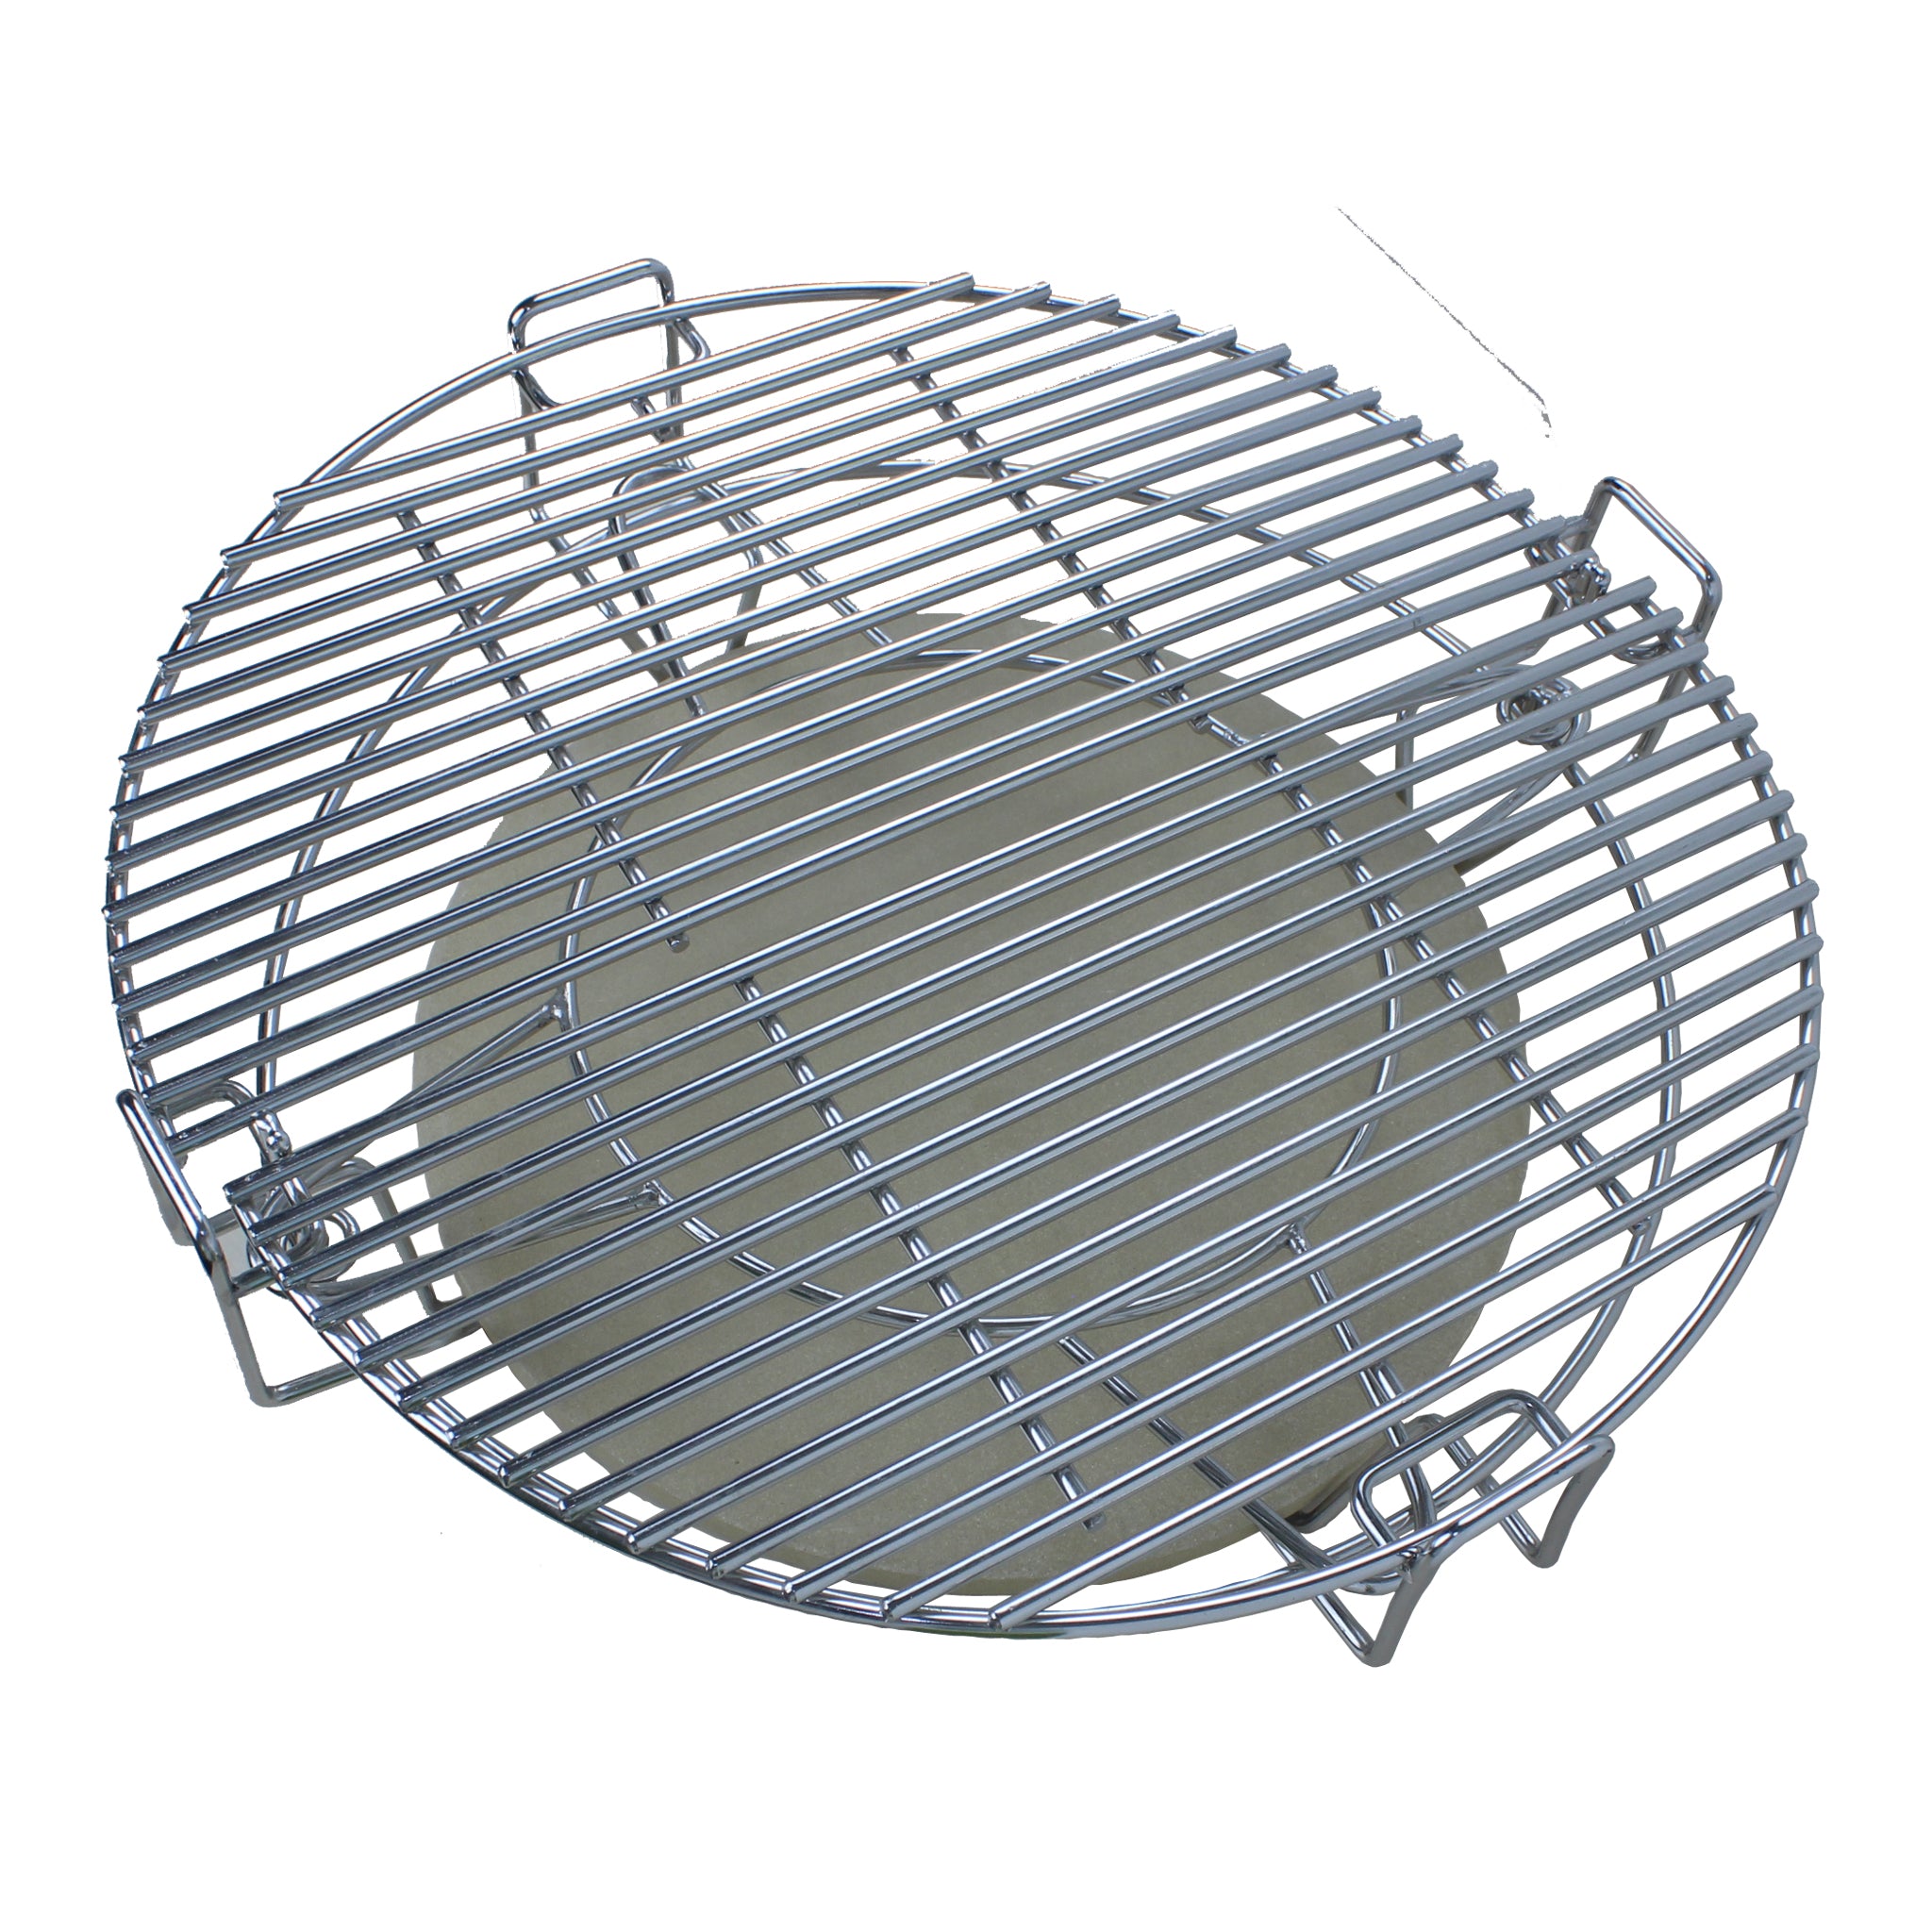 Kamado Divide & Conquer Cooking System for 22" Grill